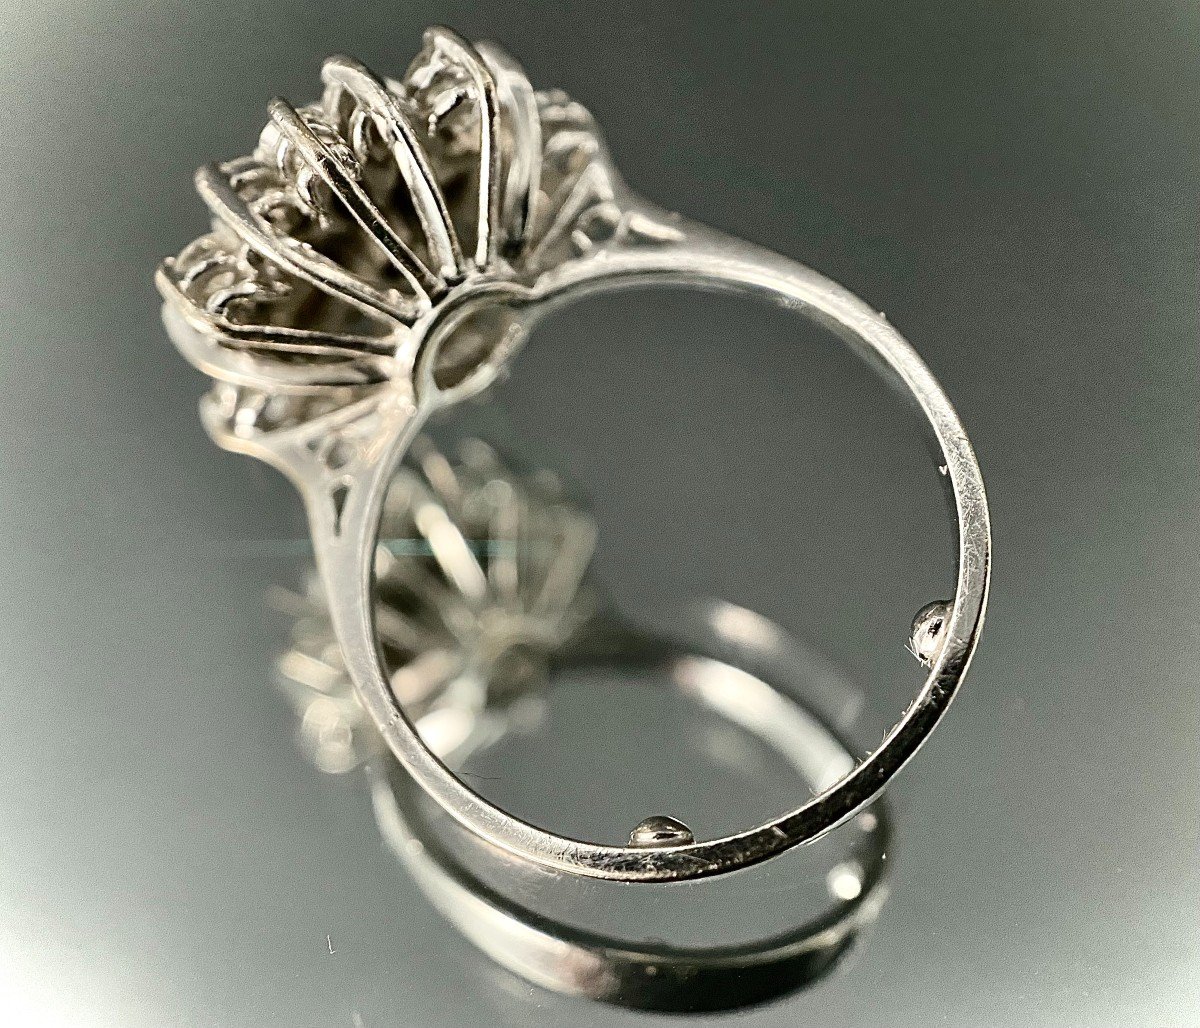 Flower Ring Set With 25 Brilliants Total: 1.48 Carats-photo-4